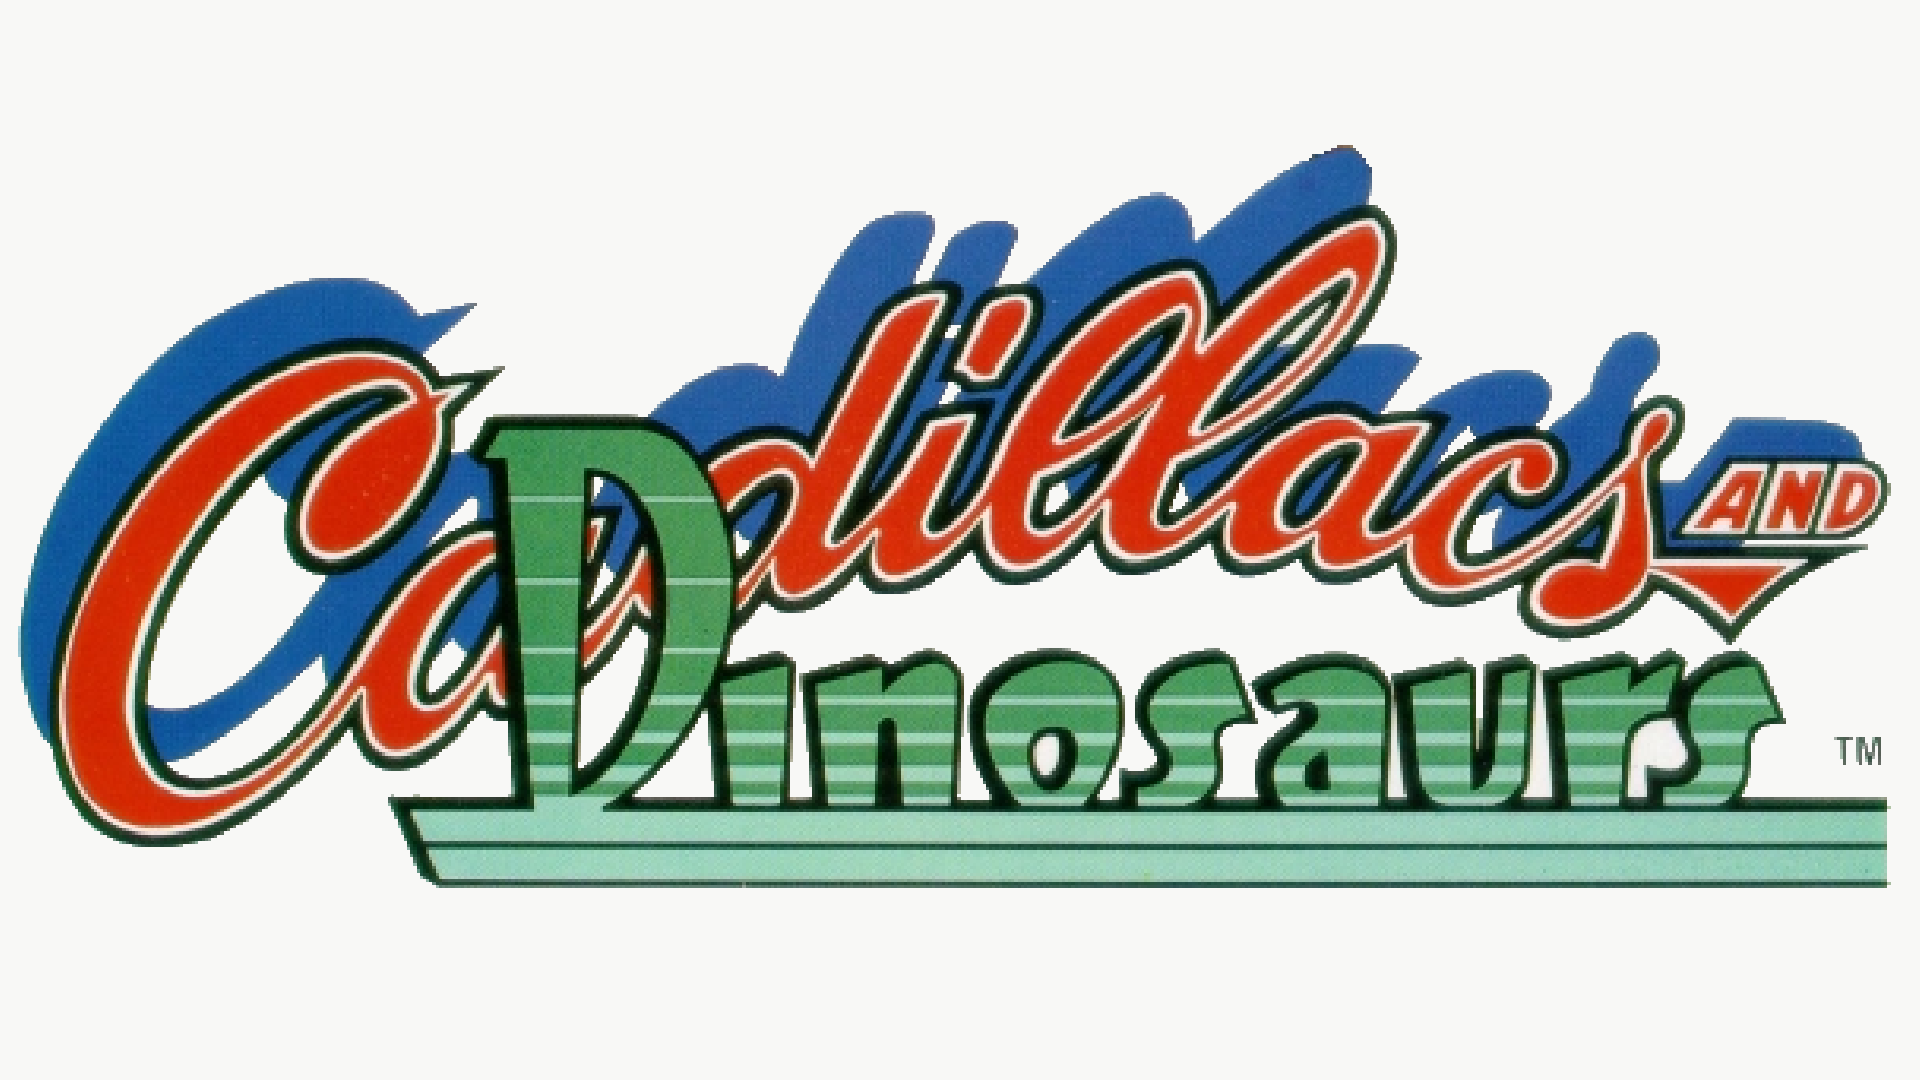 Cadillacs And Dinosaurs Backgrounds, Compatible - PC, Mobile, Gadgets| 1920x1080 px